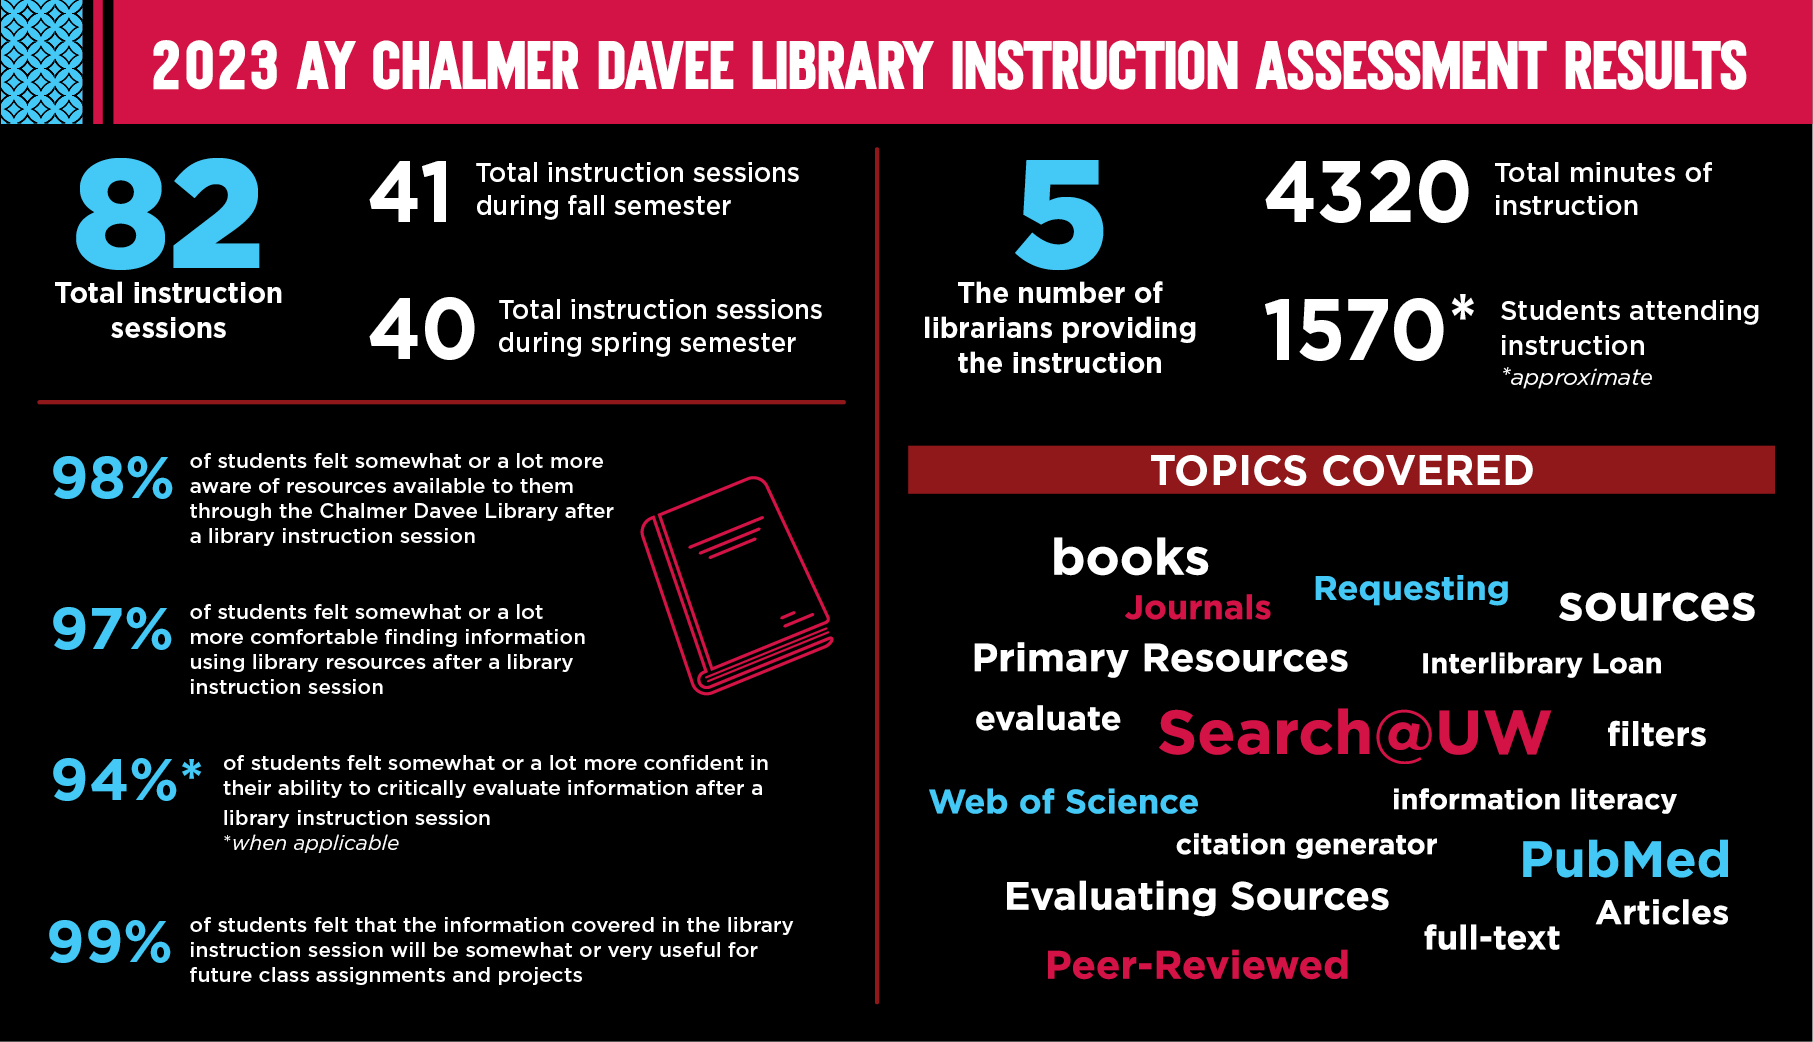 20203 AY Chalmer Davee Library Instsruction Assessment Results